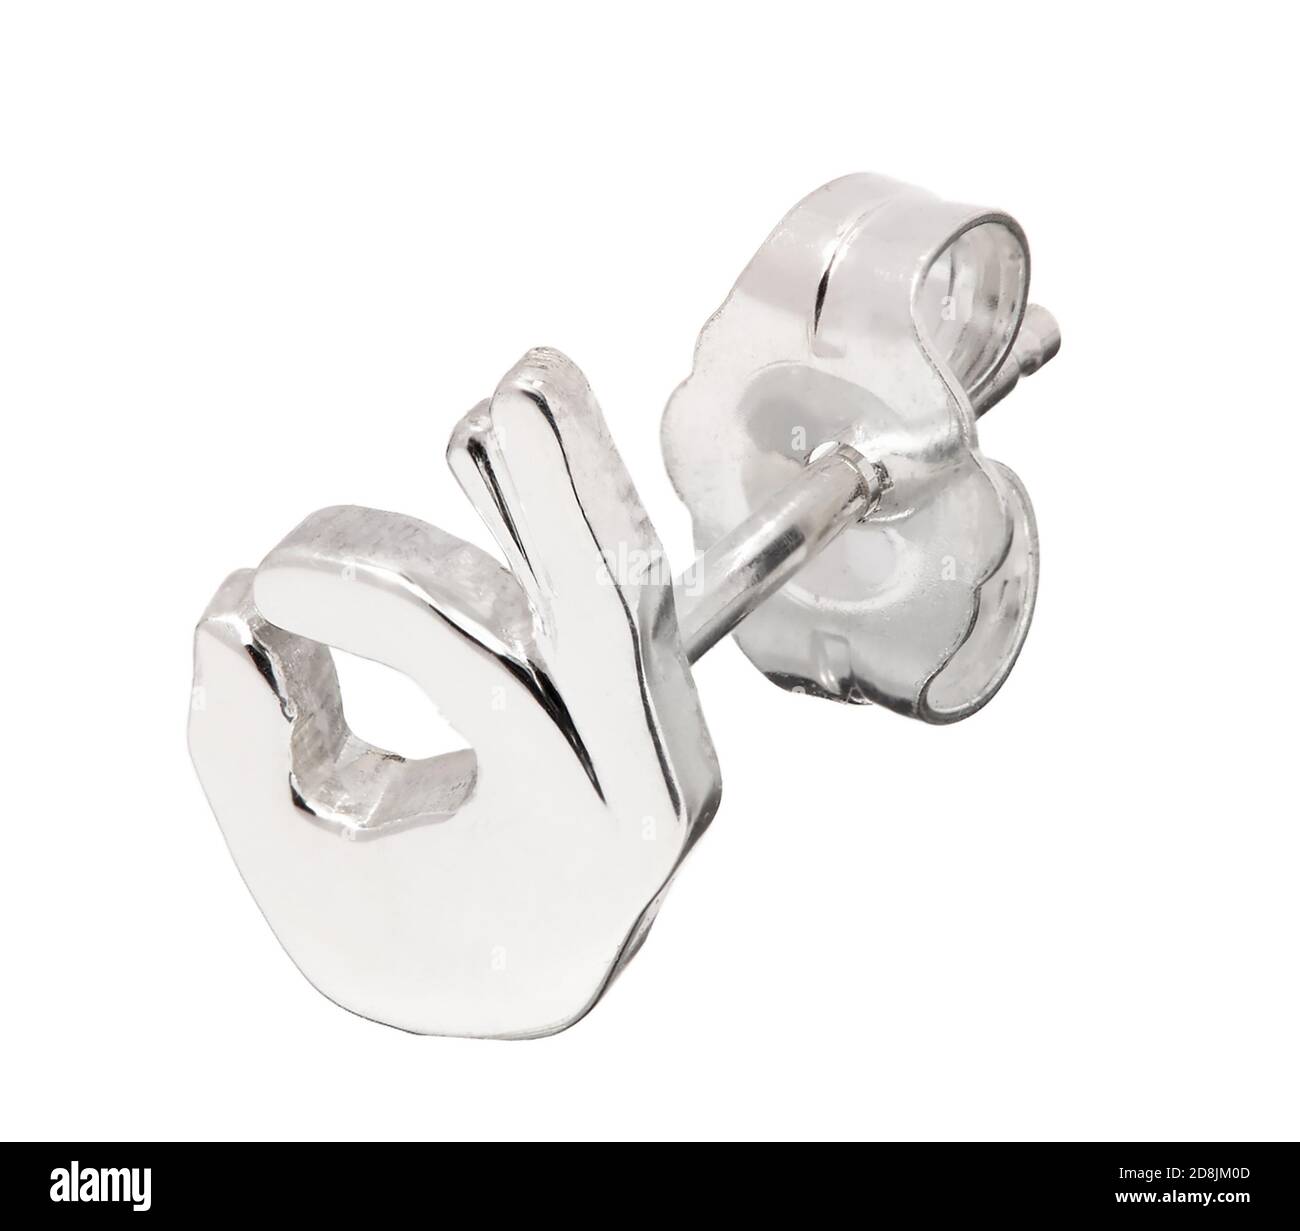 Silver emoji 'OK' Hand gesture earring designed by Wendy Brandes photographed on a white background Stock Photo